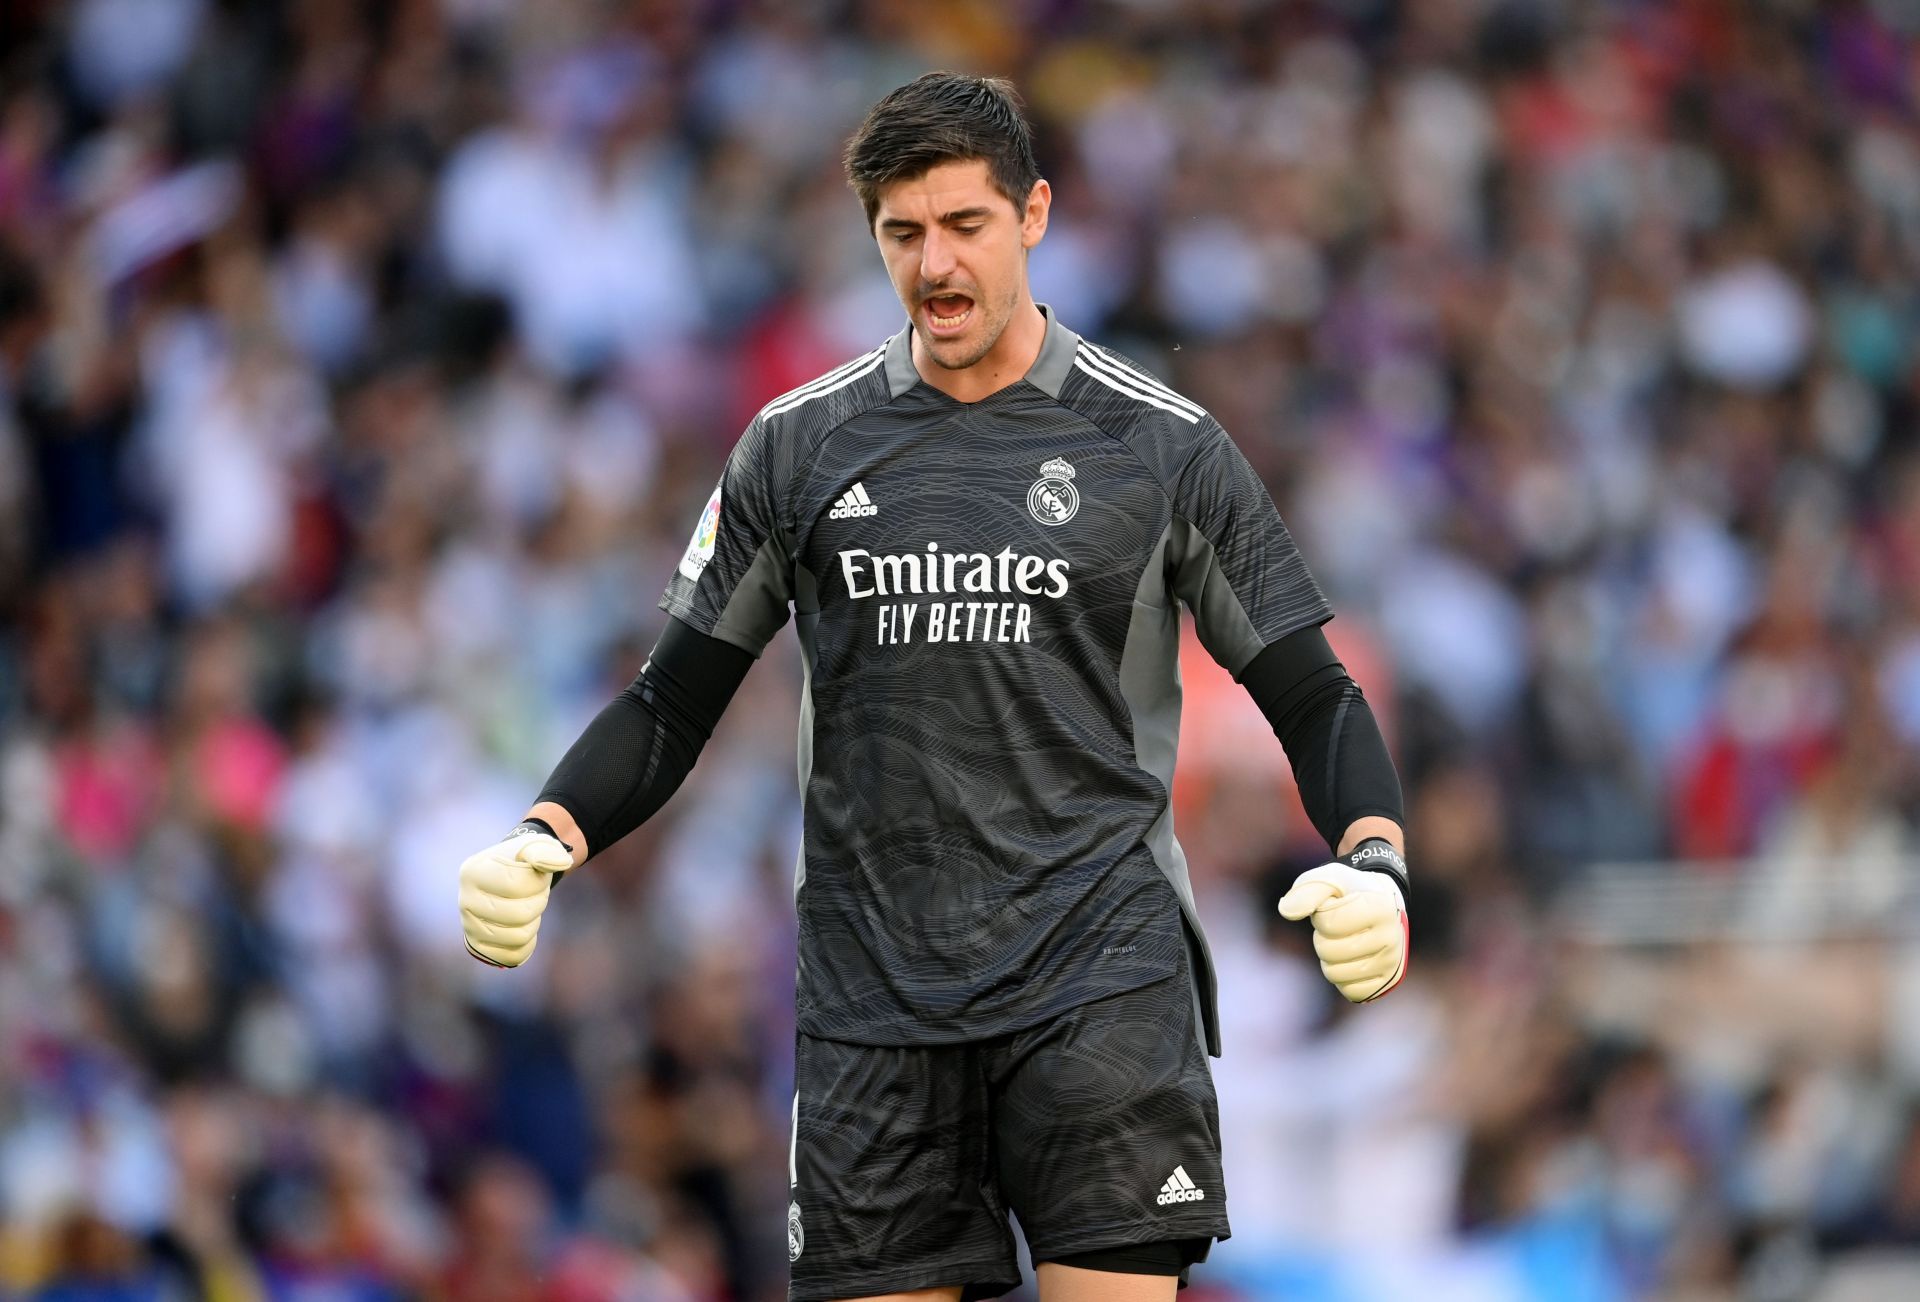 Courtois has warned PSG that individual brilliance alone cannot win games.